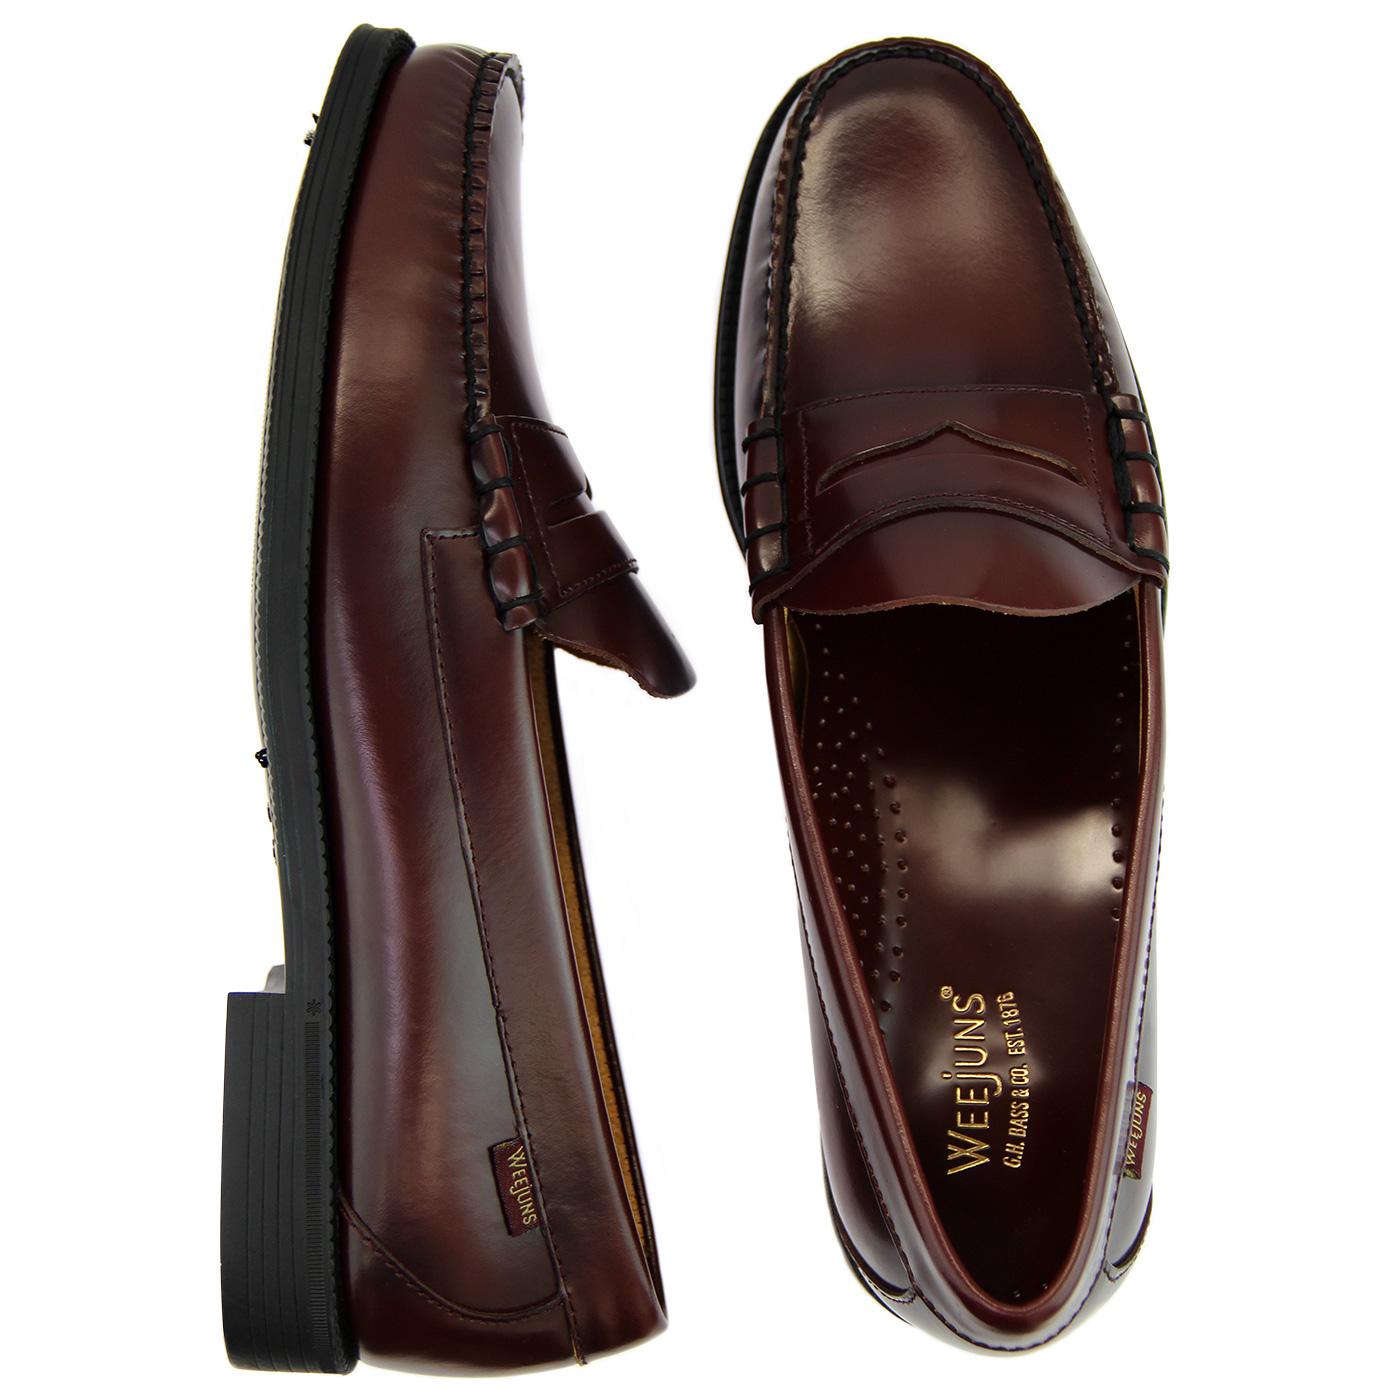 BASS WEEJUNS Easy Weejuns Larson Penny Loafers in Wine